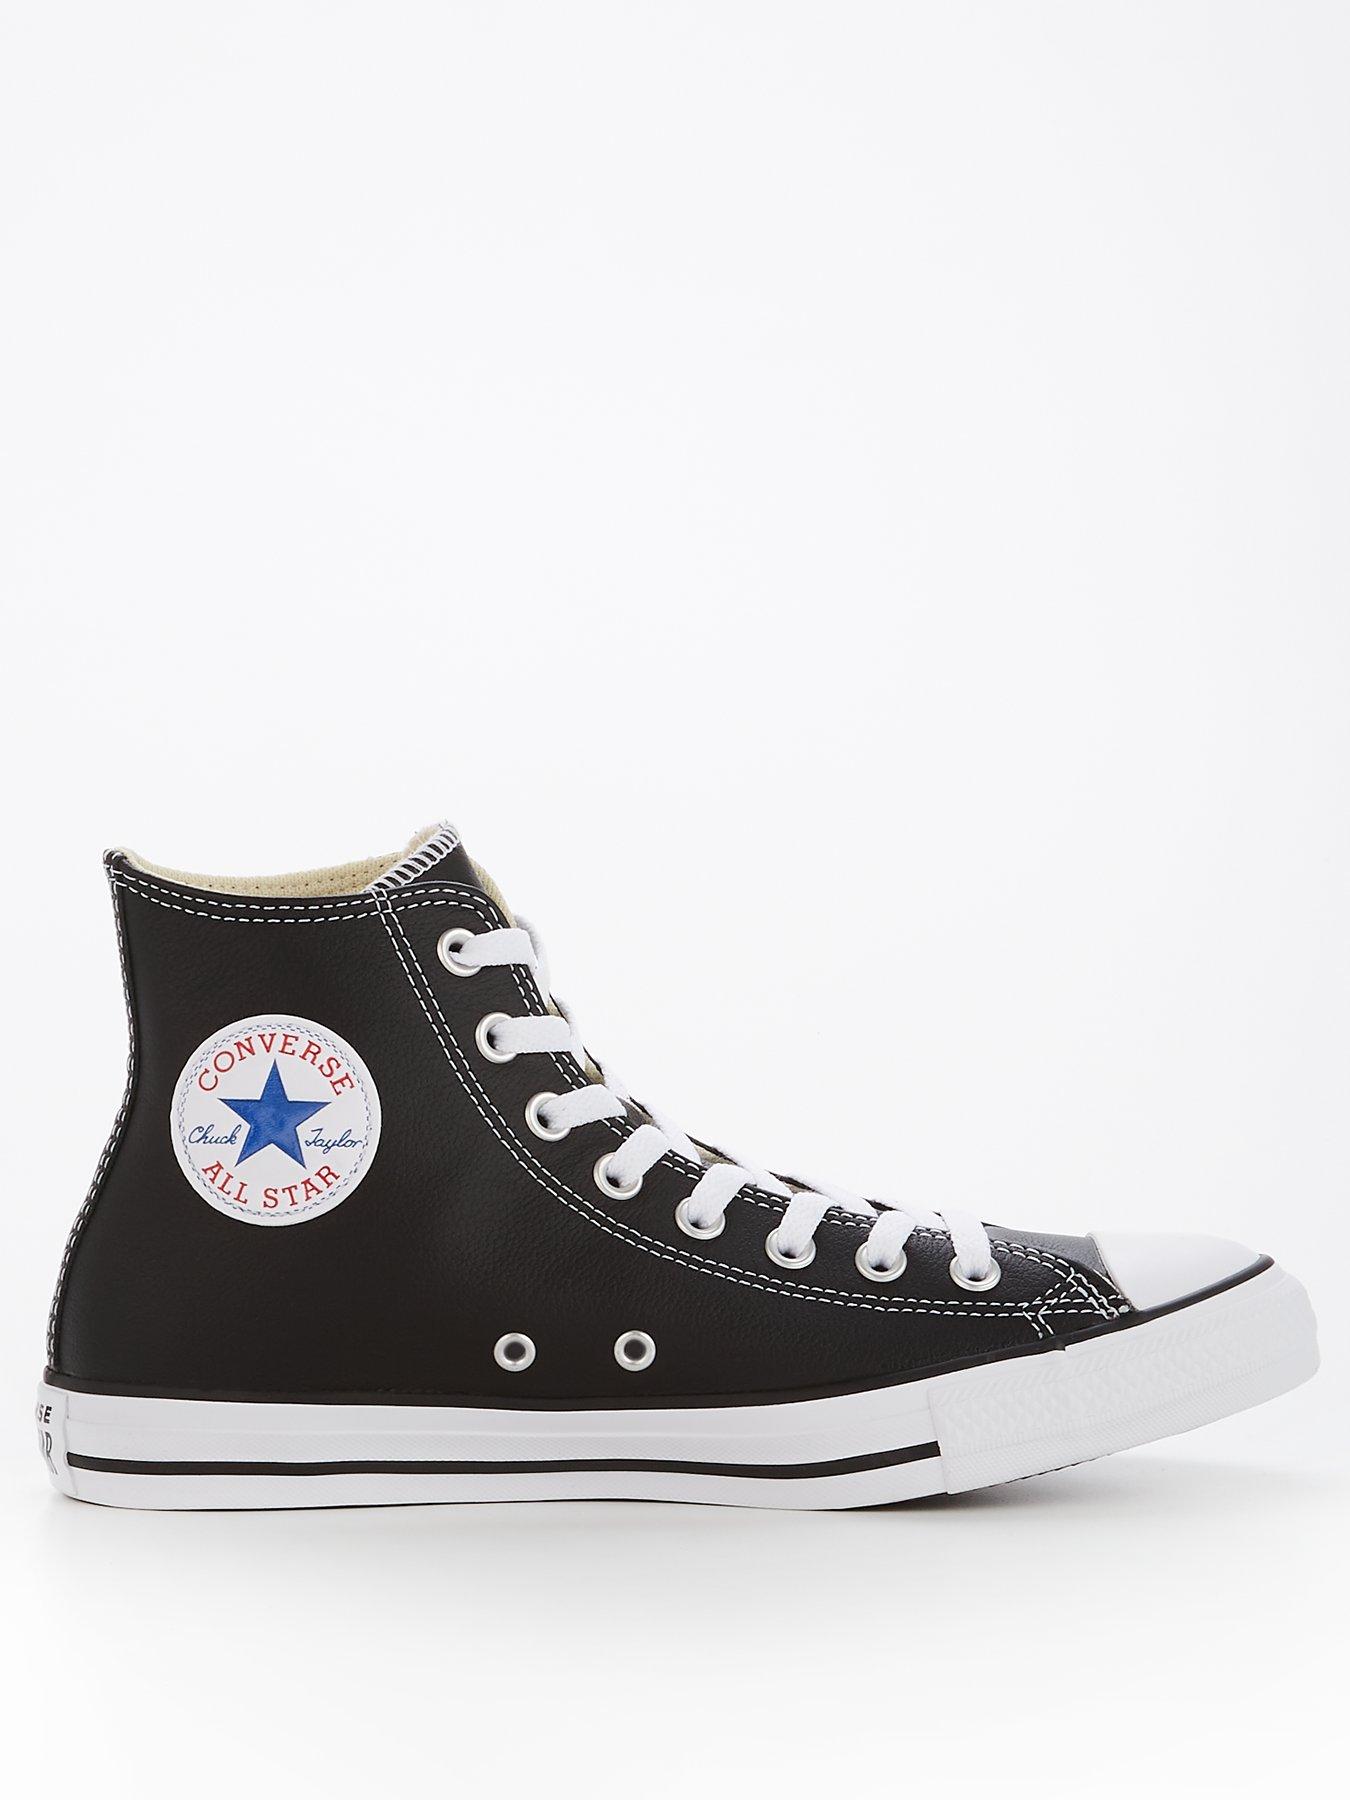 are all converse leather